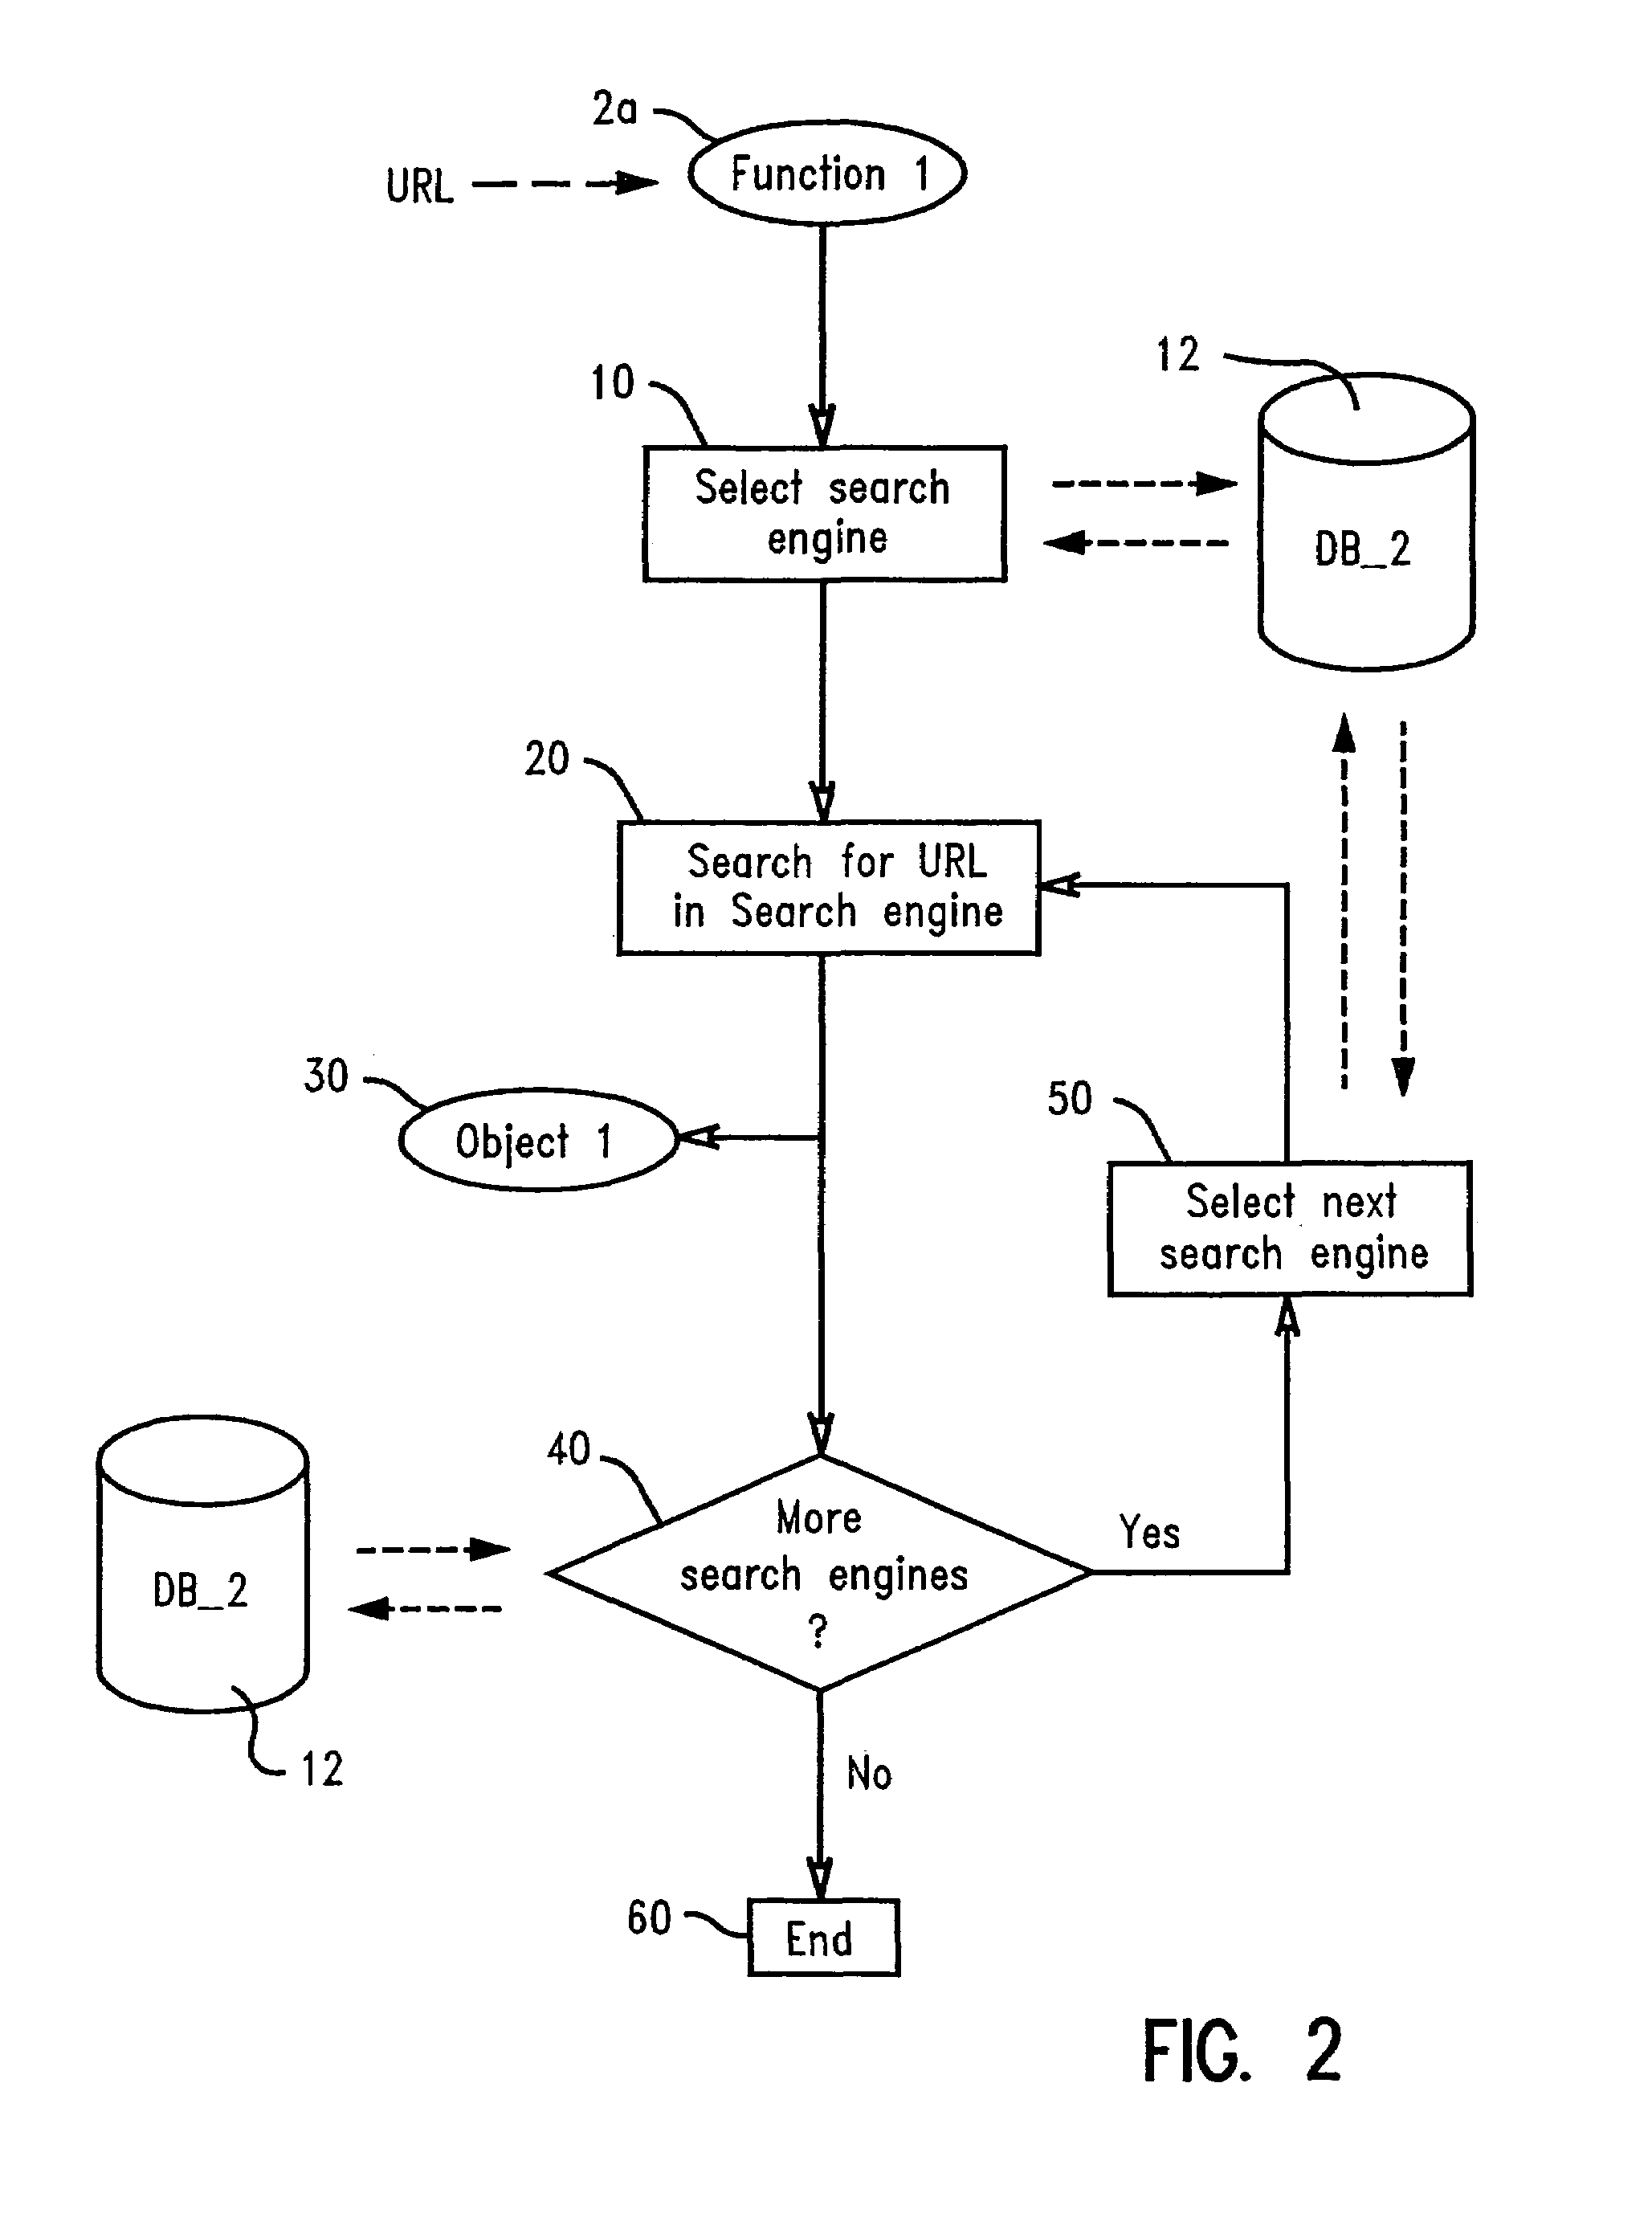 System and method for accessing content of a web page